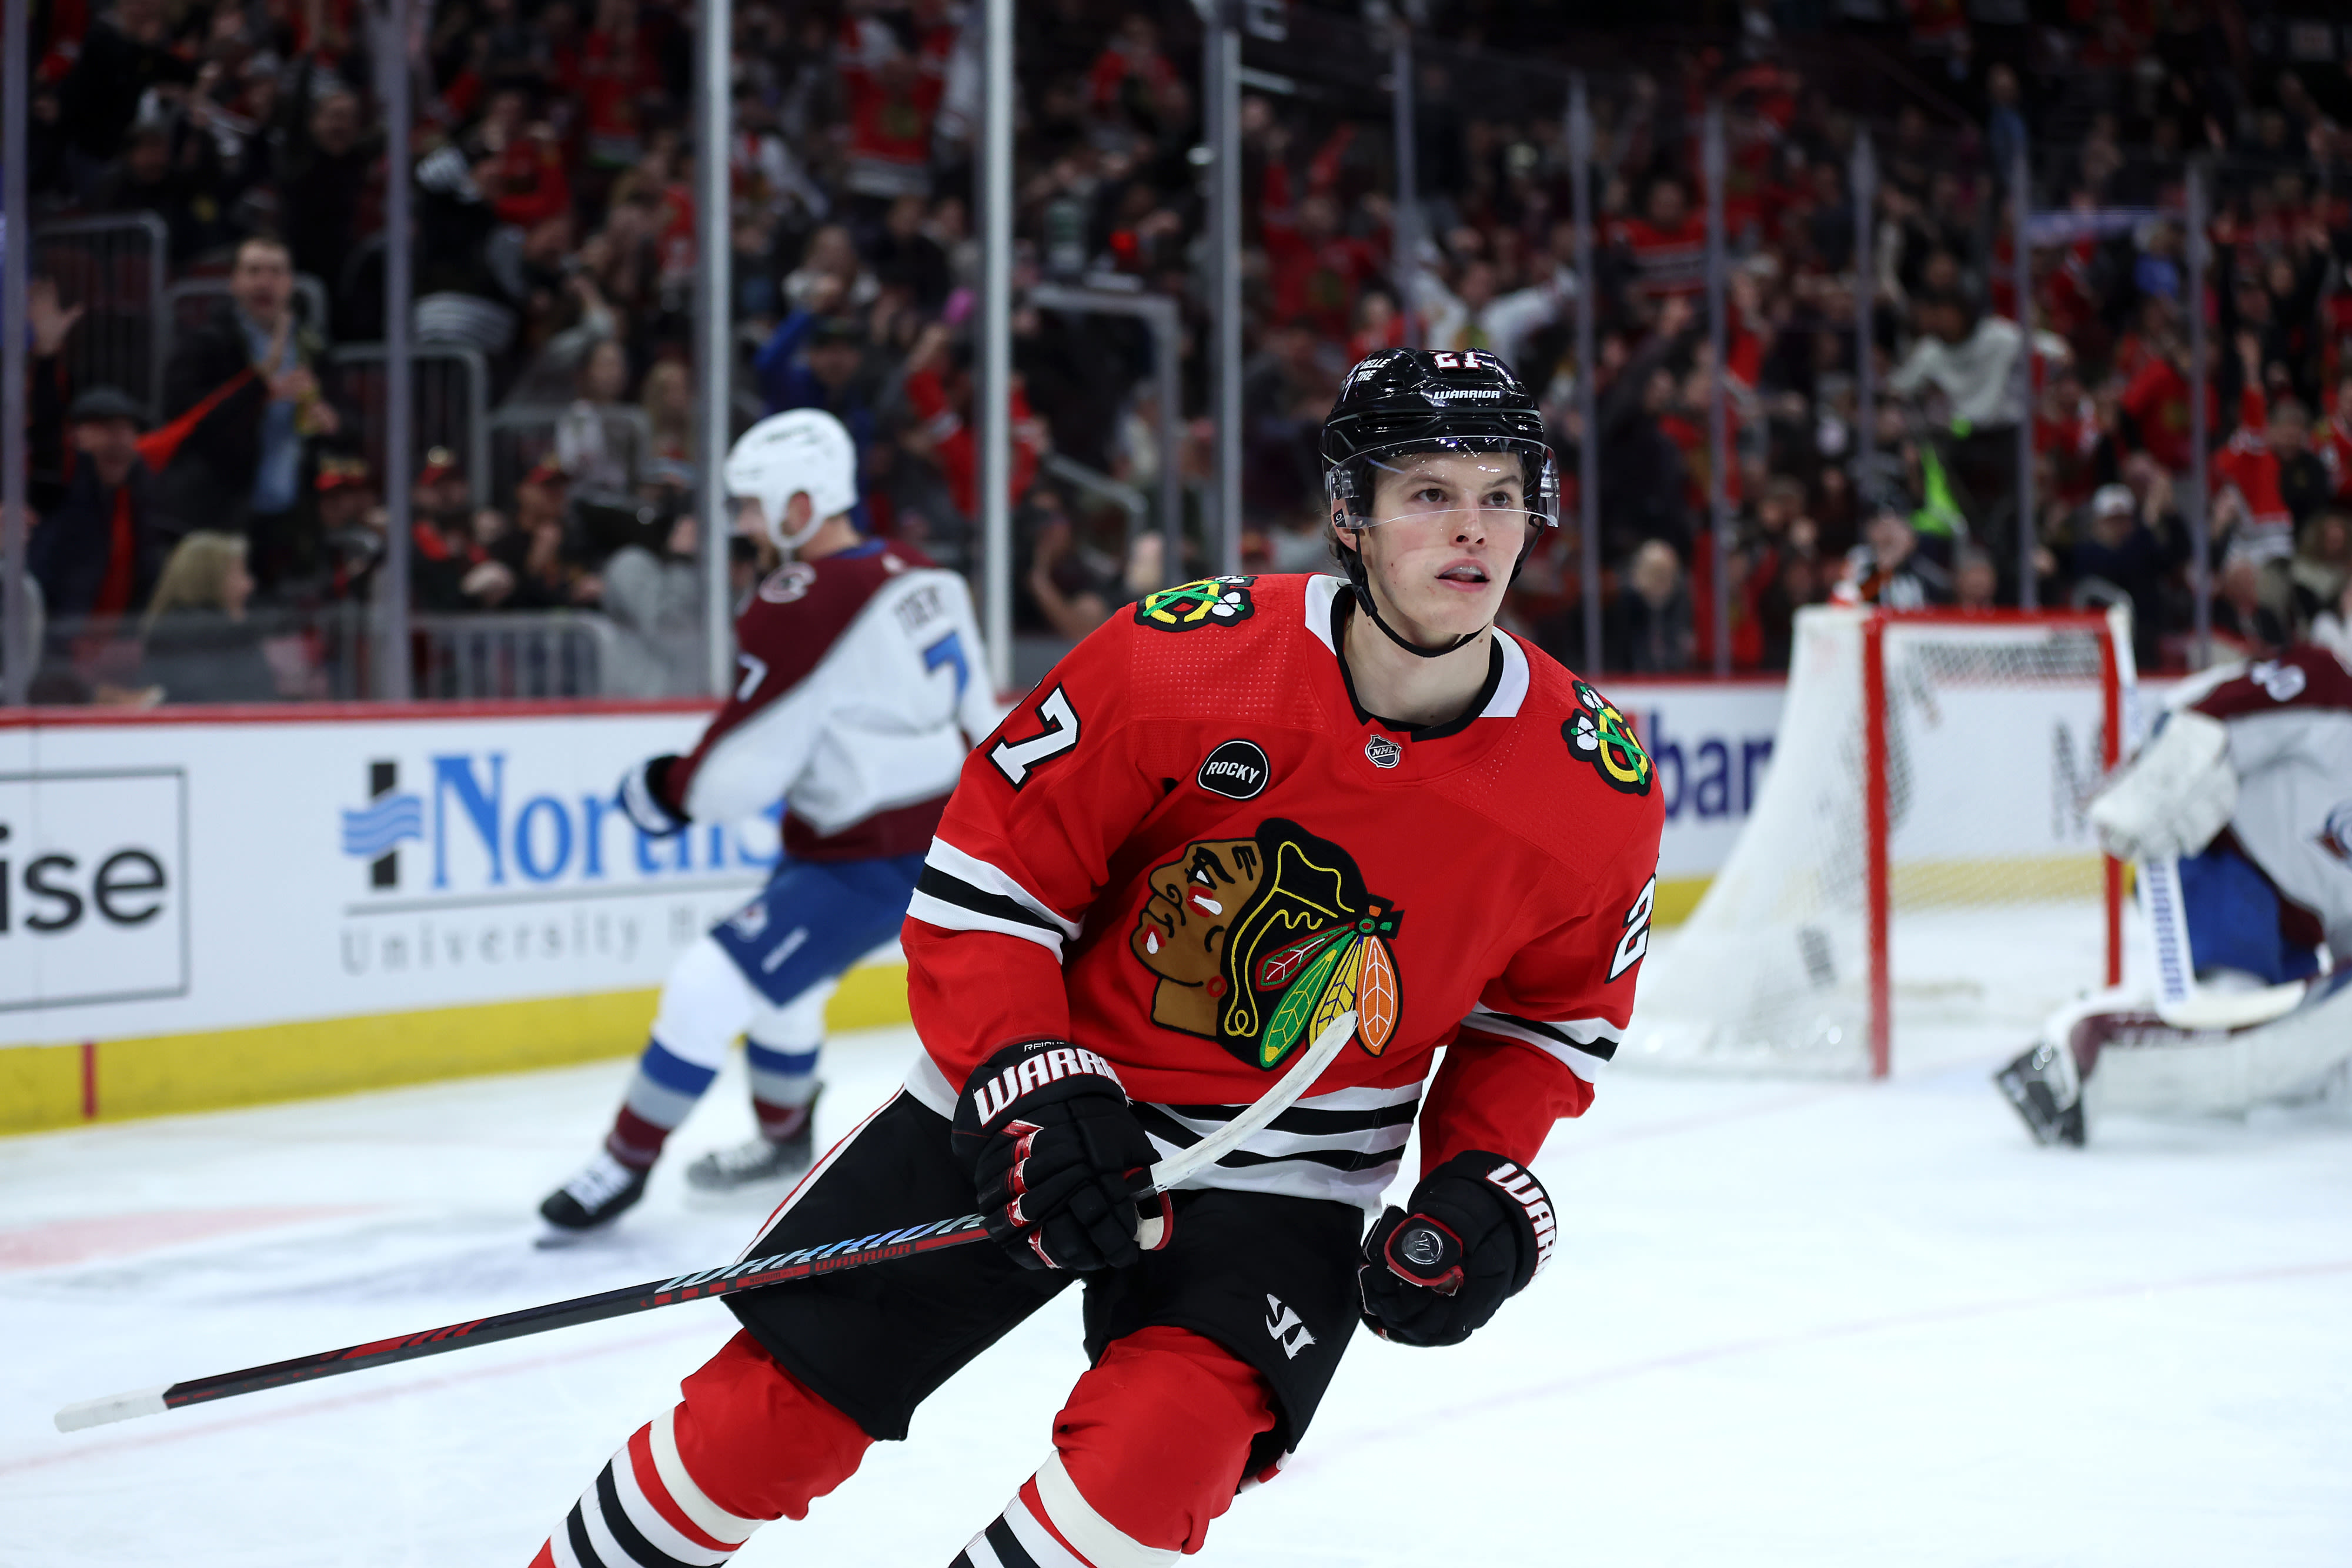 Lukas Reichel gets a new 2-year deal from the Chicago Blackhawks after an uneven season